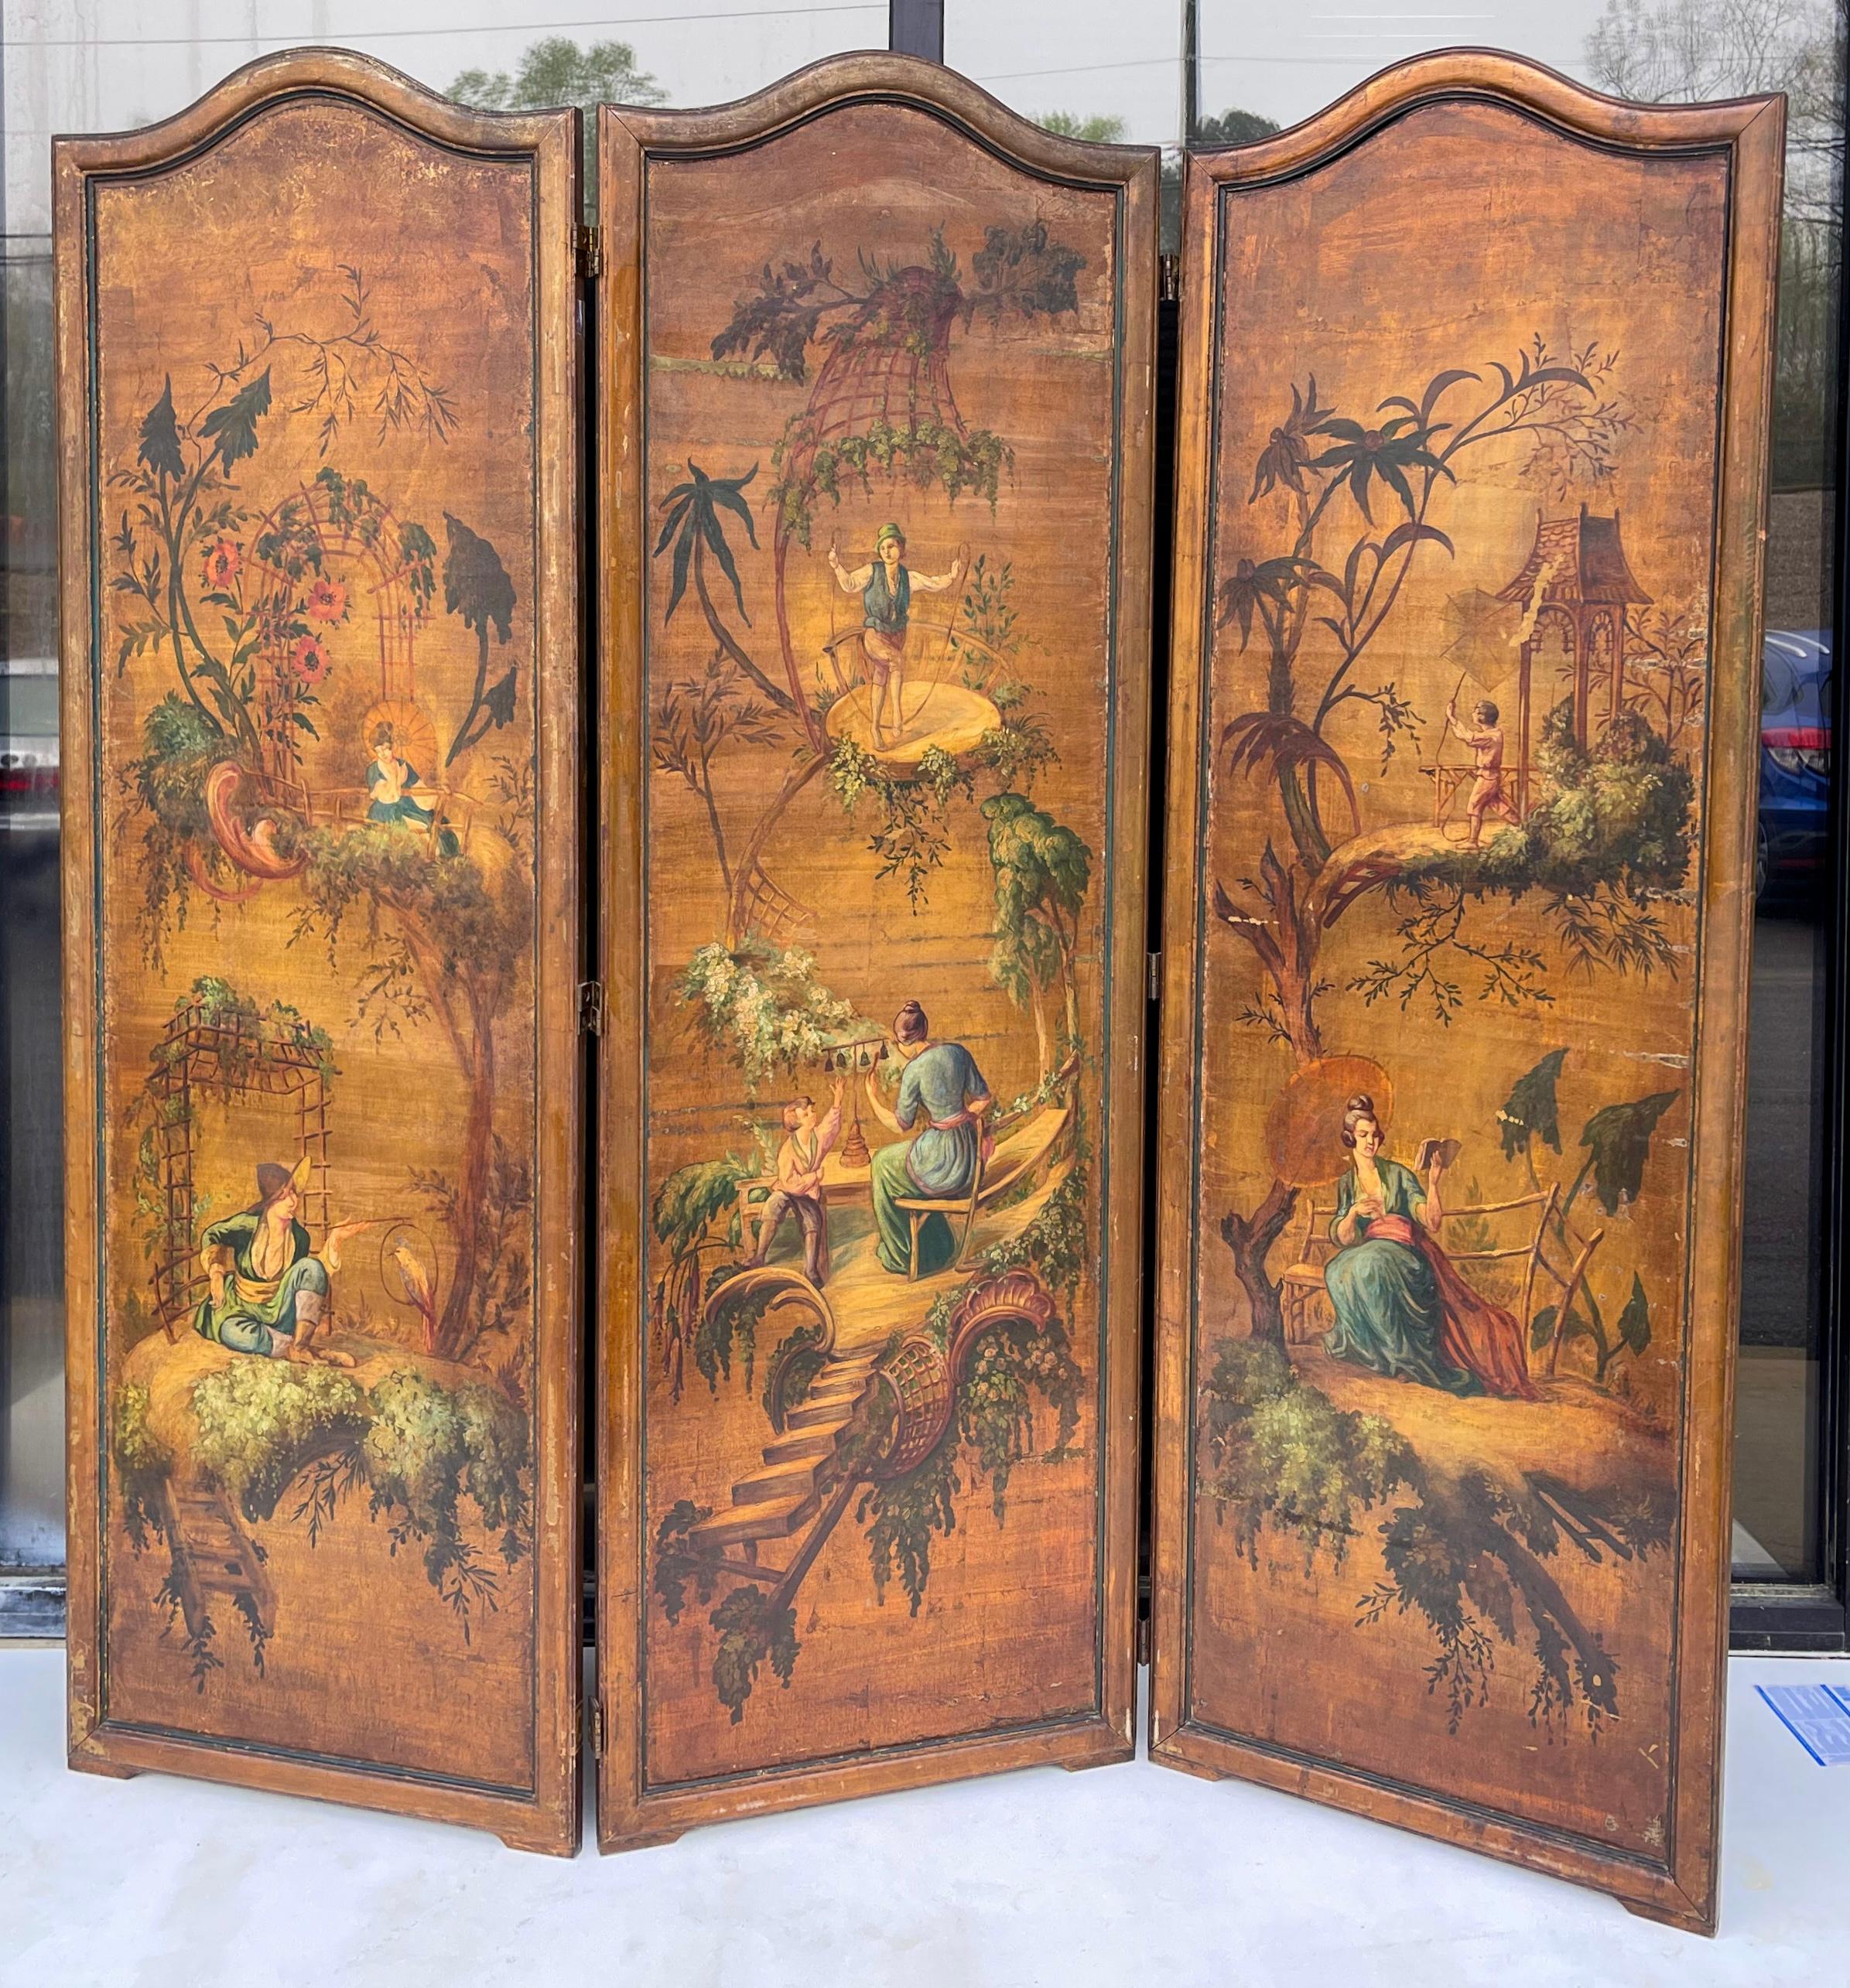 European Early 20th-C. Hand Painted French Chinoiserie Oil On Canvas Screen - 3 Panels  For Sale